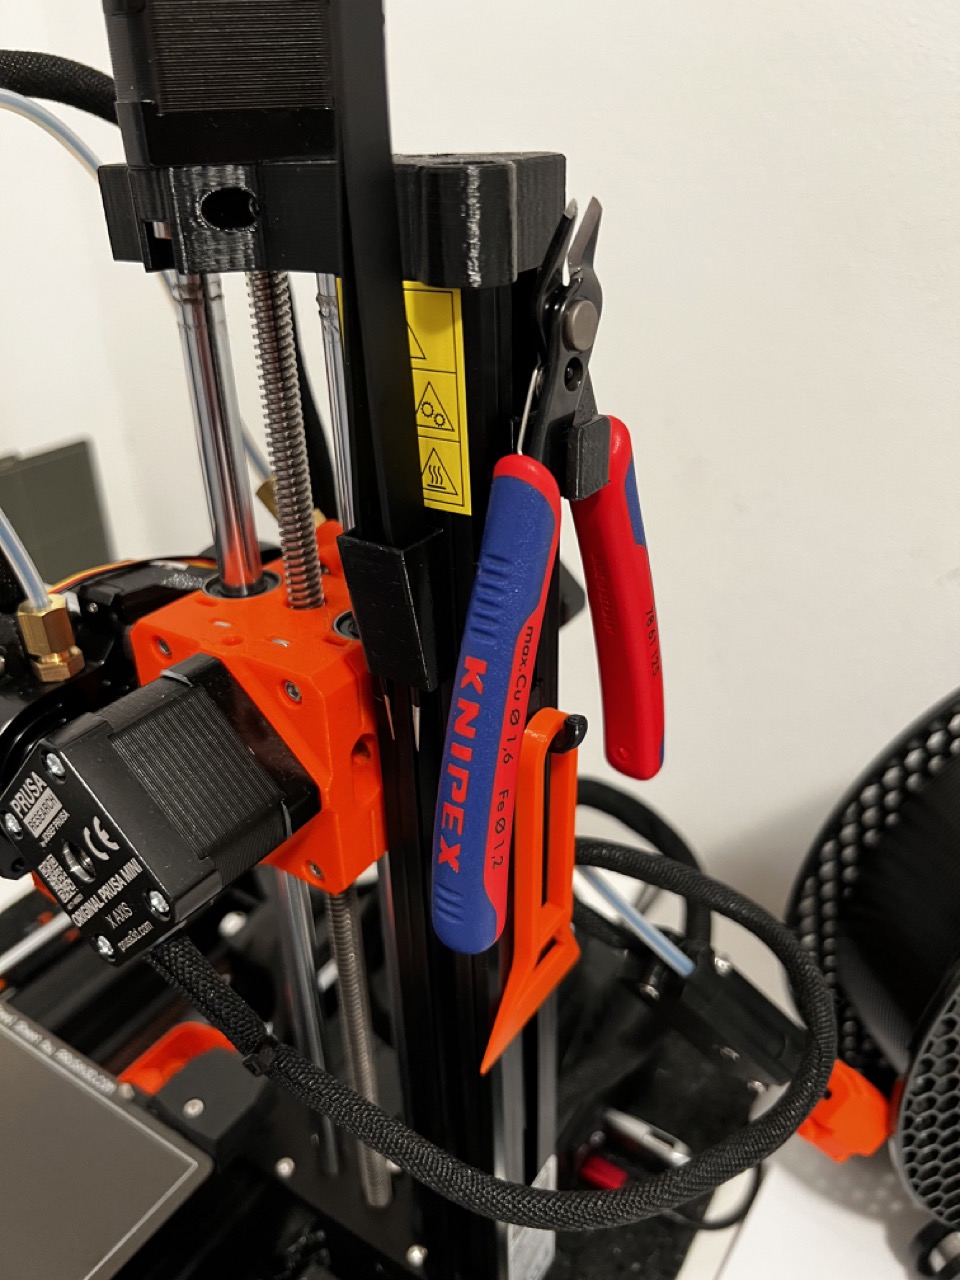 MINI+ (and others) Z axis tool holders